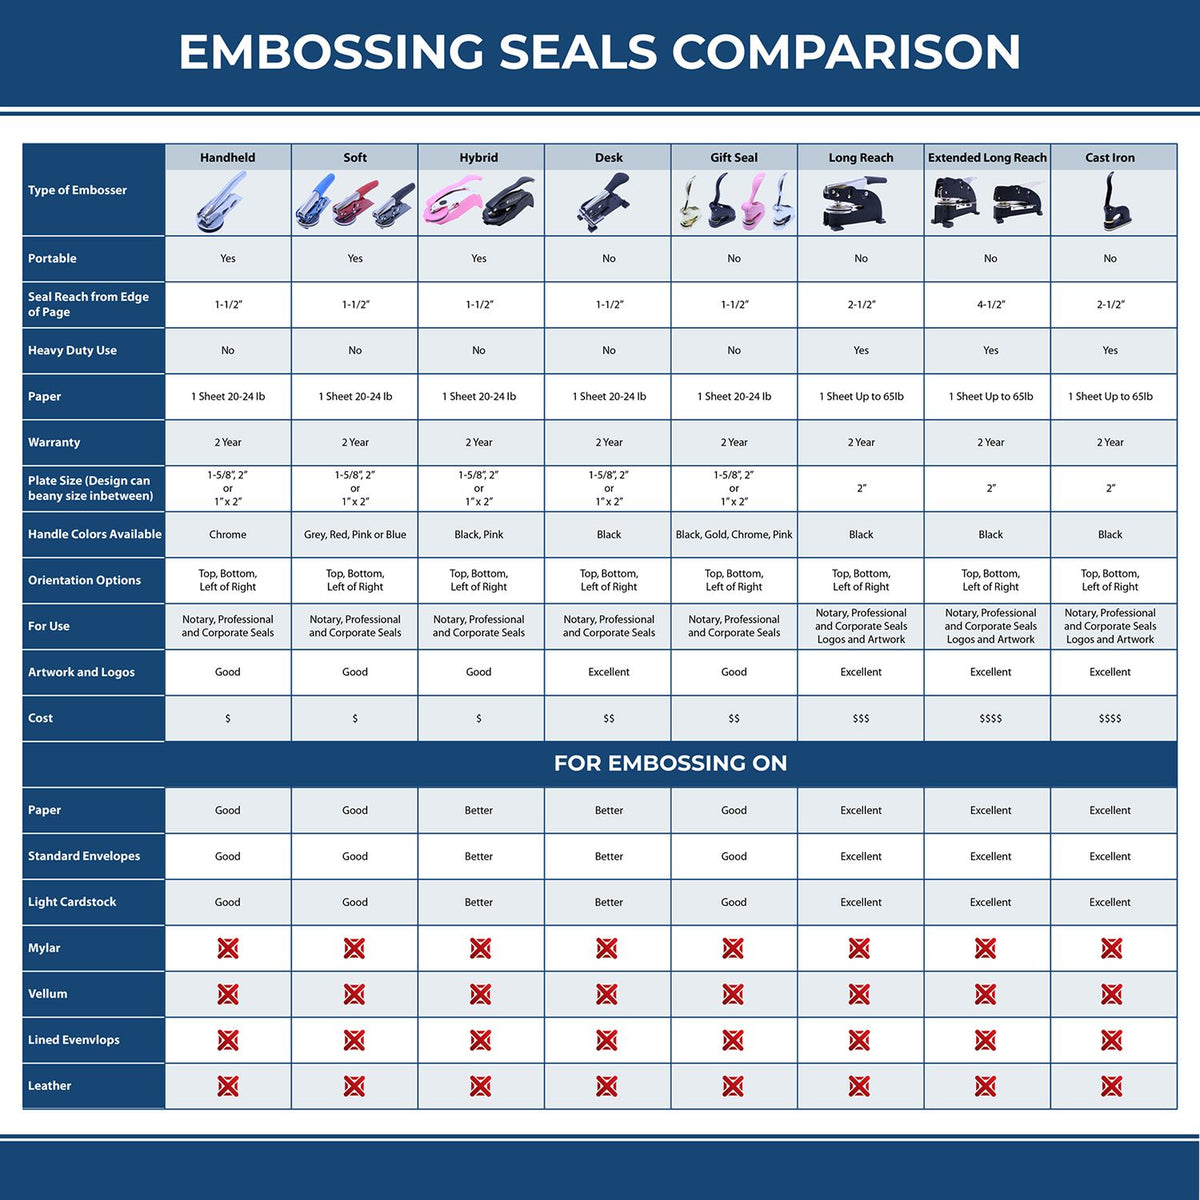 A comparison chart for the different types of mount models available for the Handheld Tennessee Professional Geologist Embosser